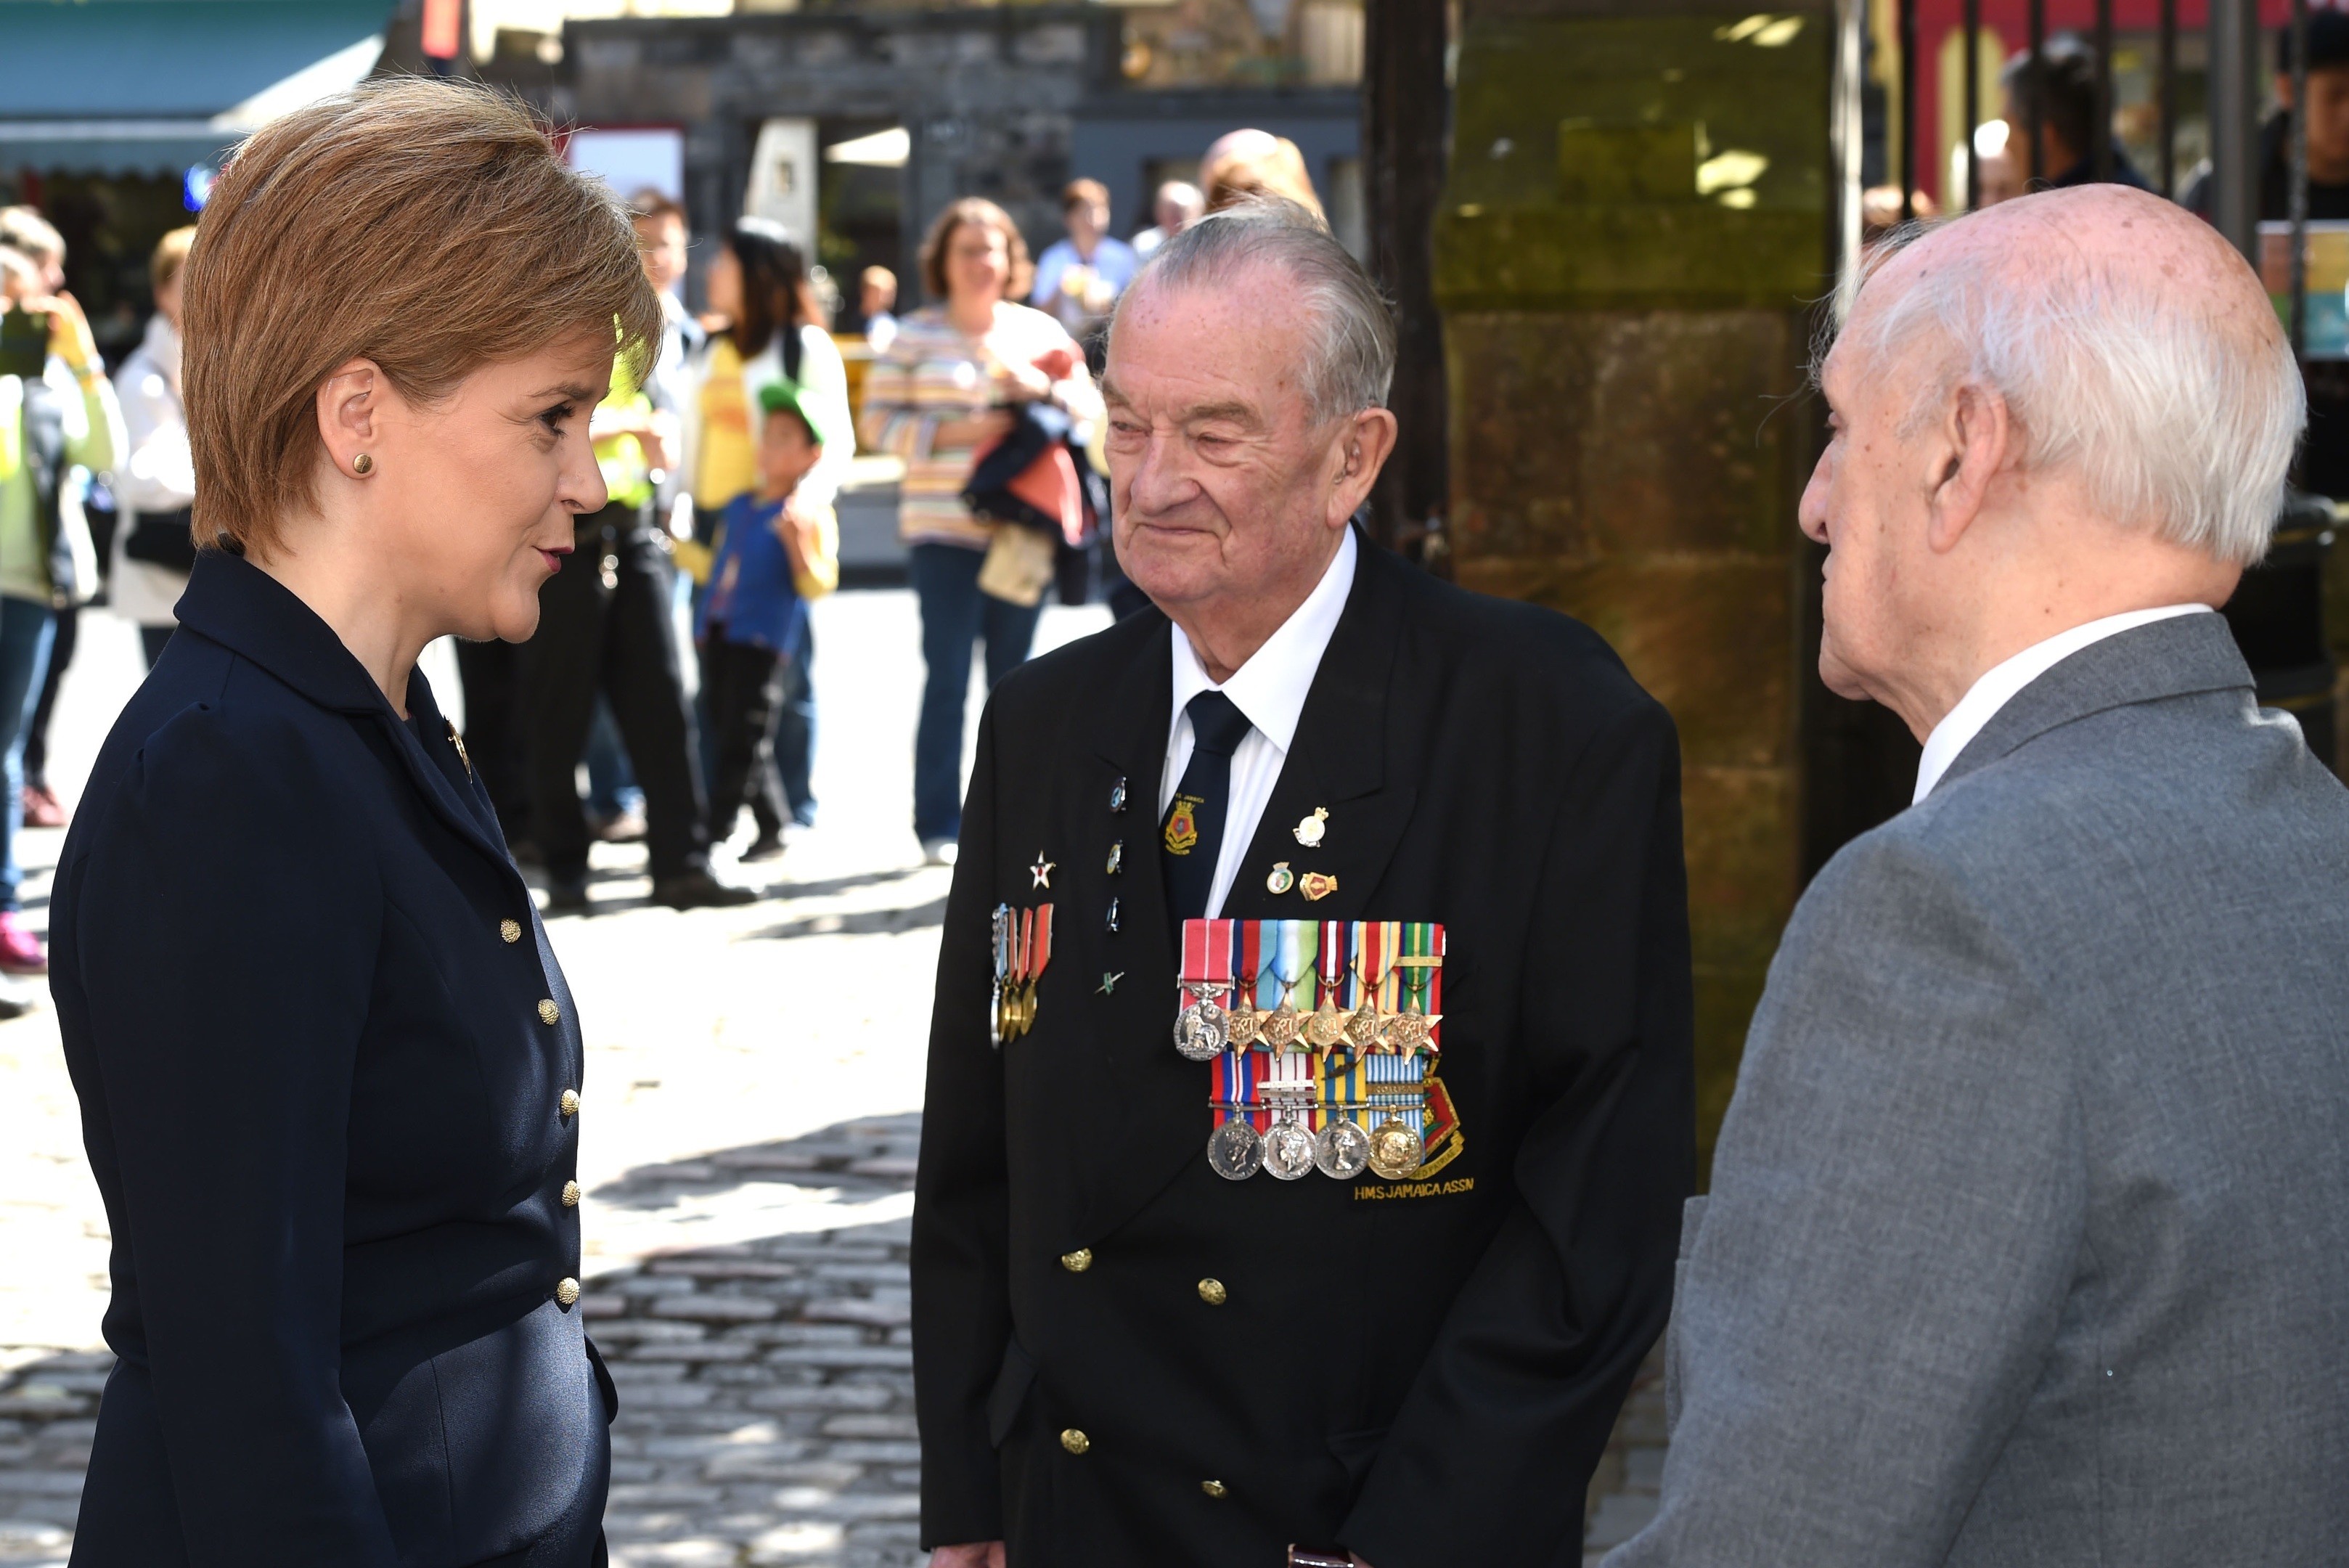 First Minister Nicola Sturgeon meets with veterans at the VJ Day 70th anniversary commemoration event